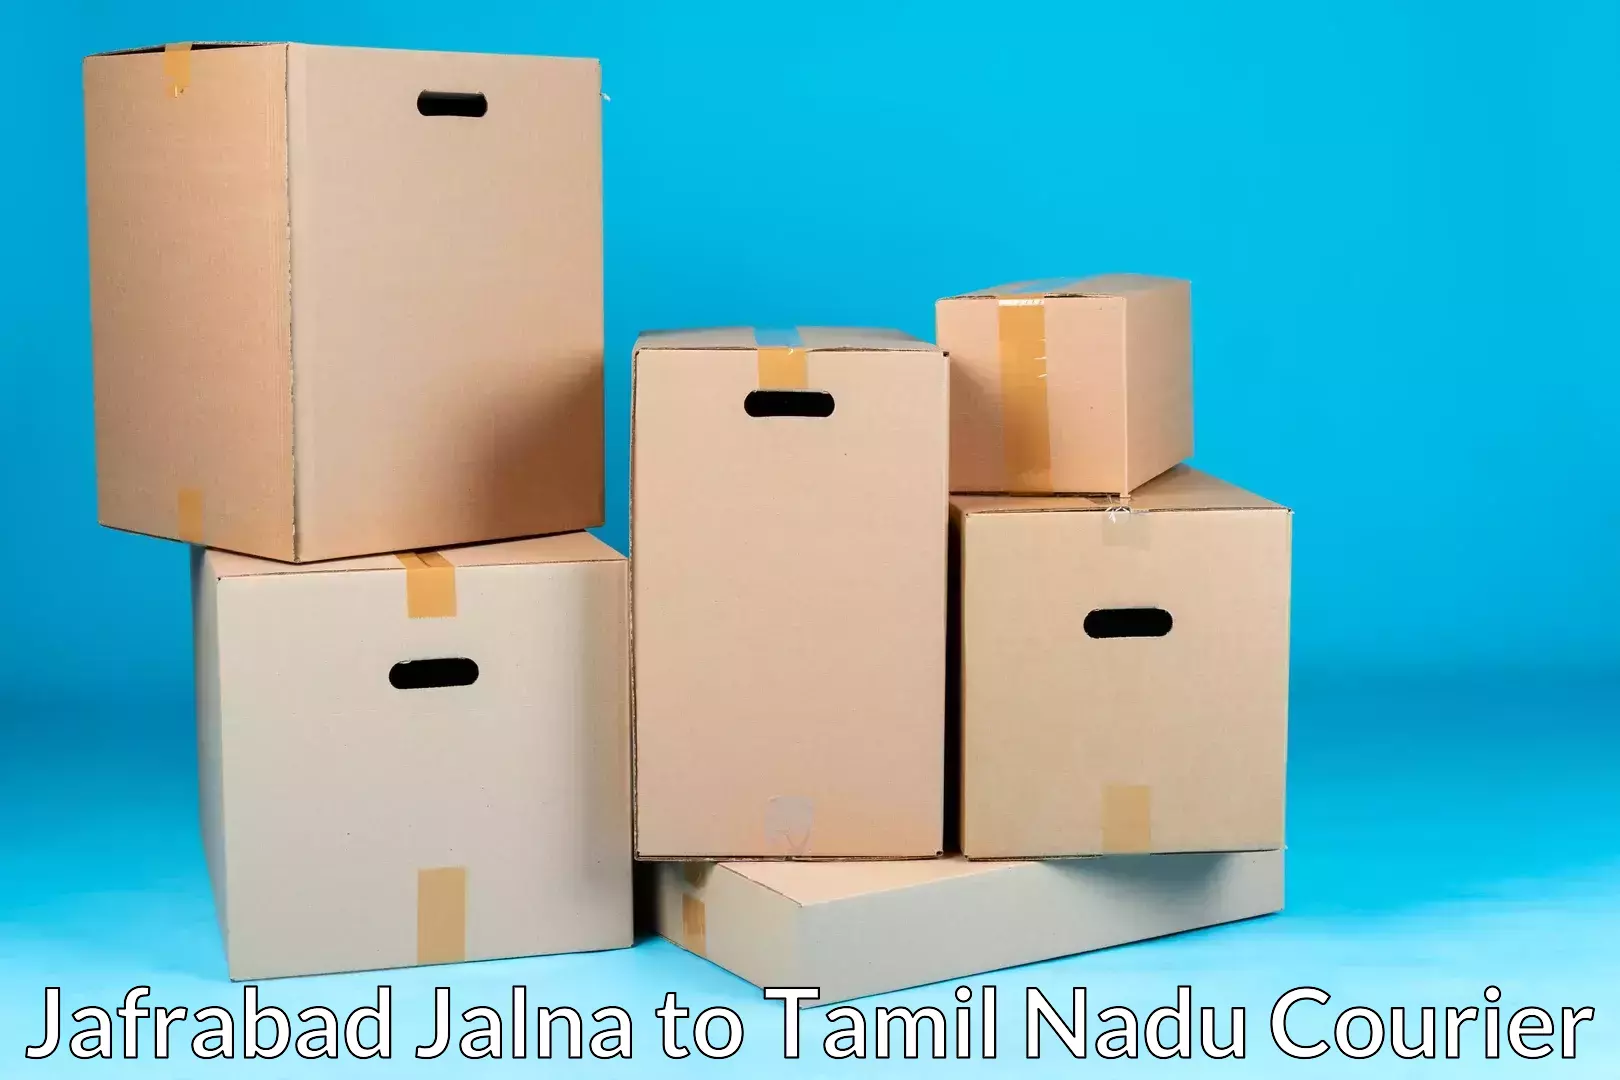 Professional movers and packers Jafrabad Jalna to Melur